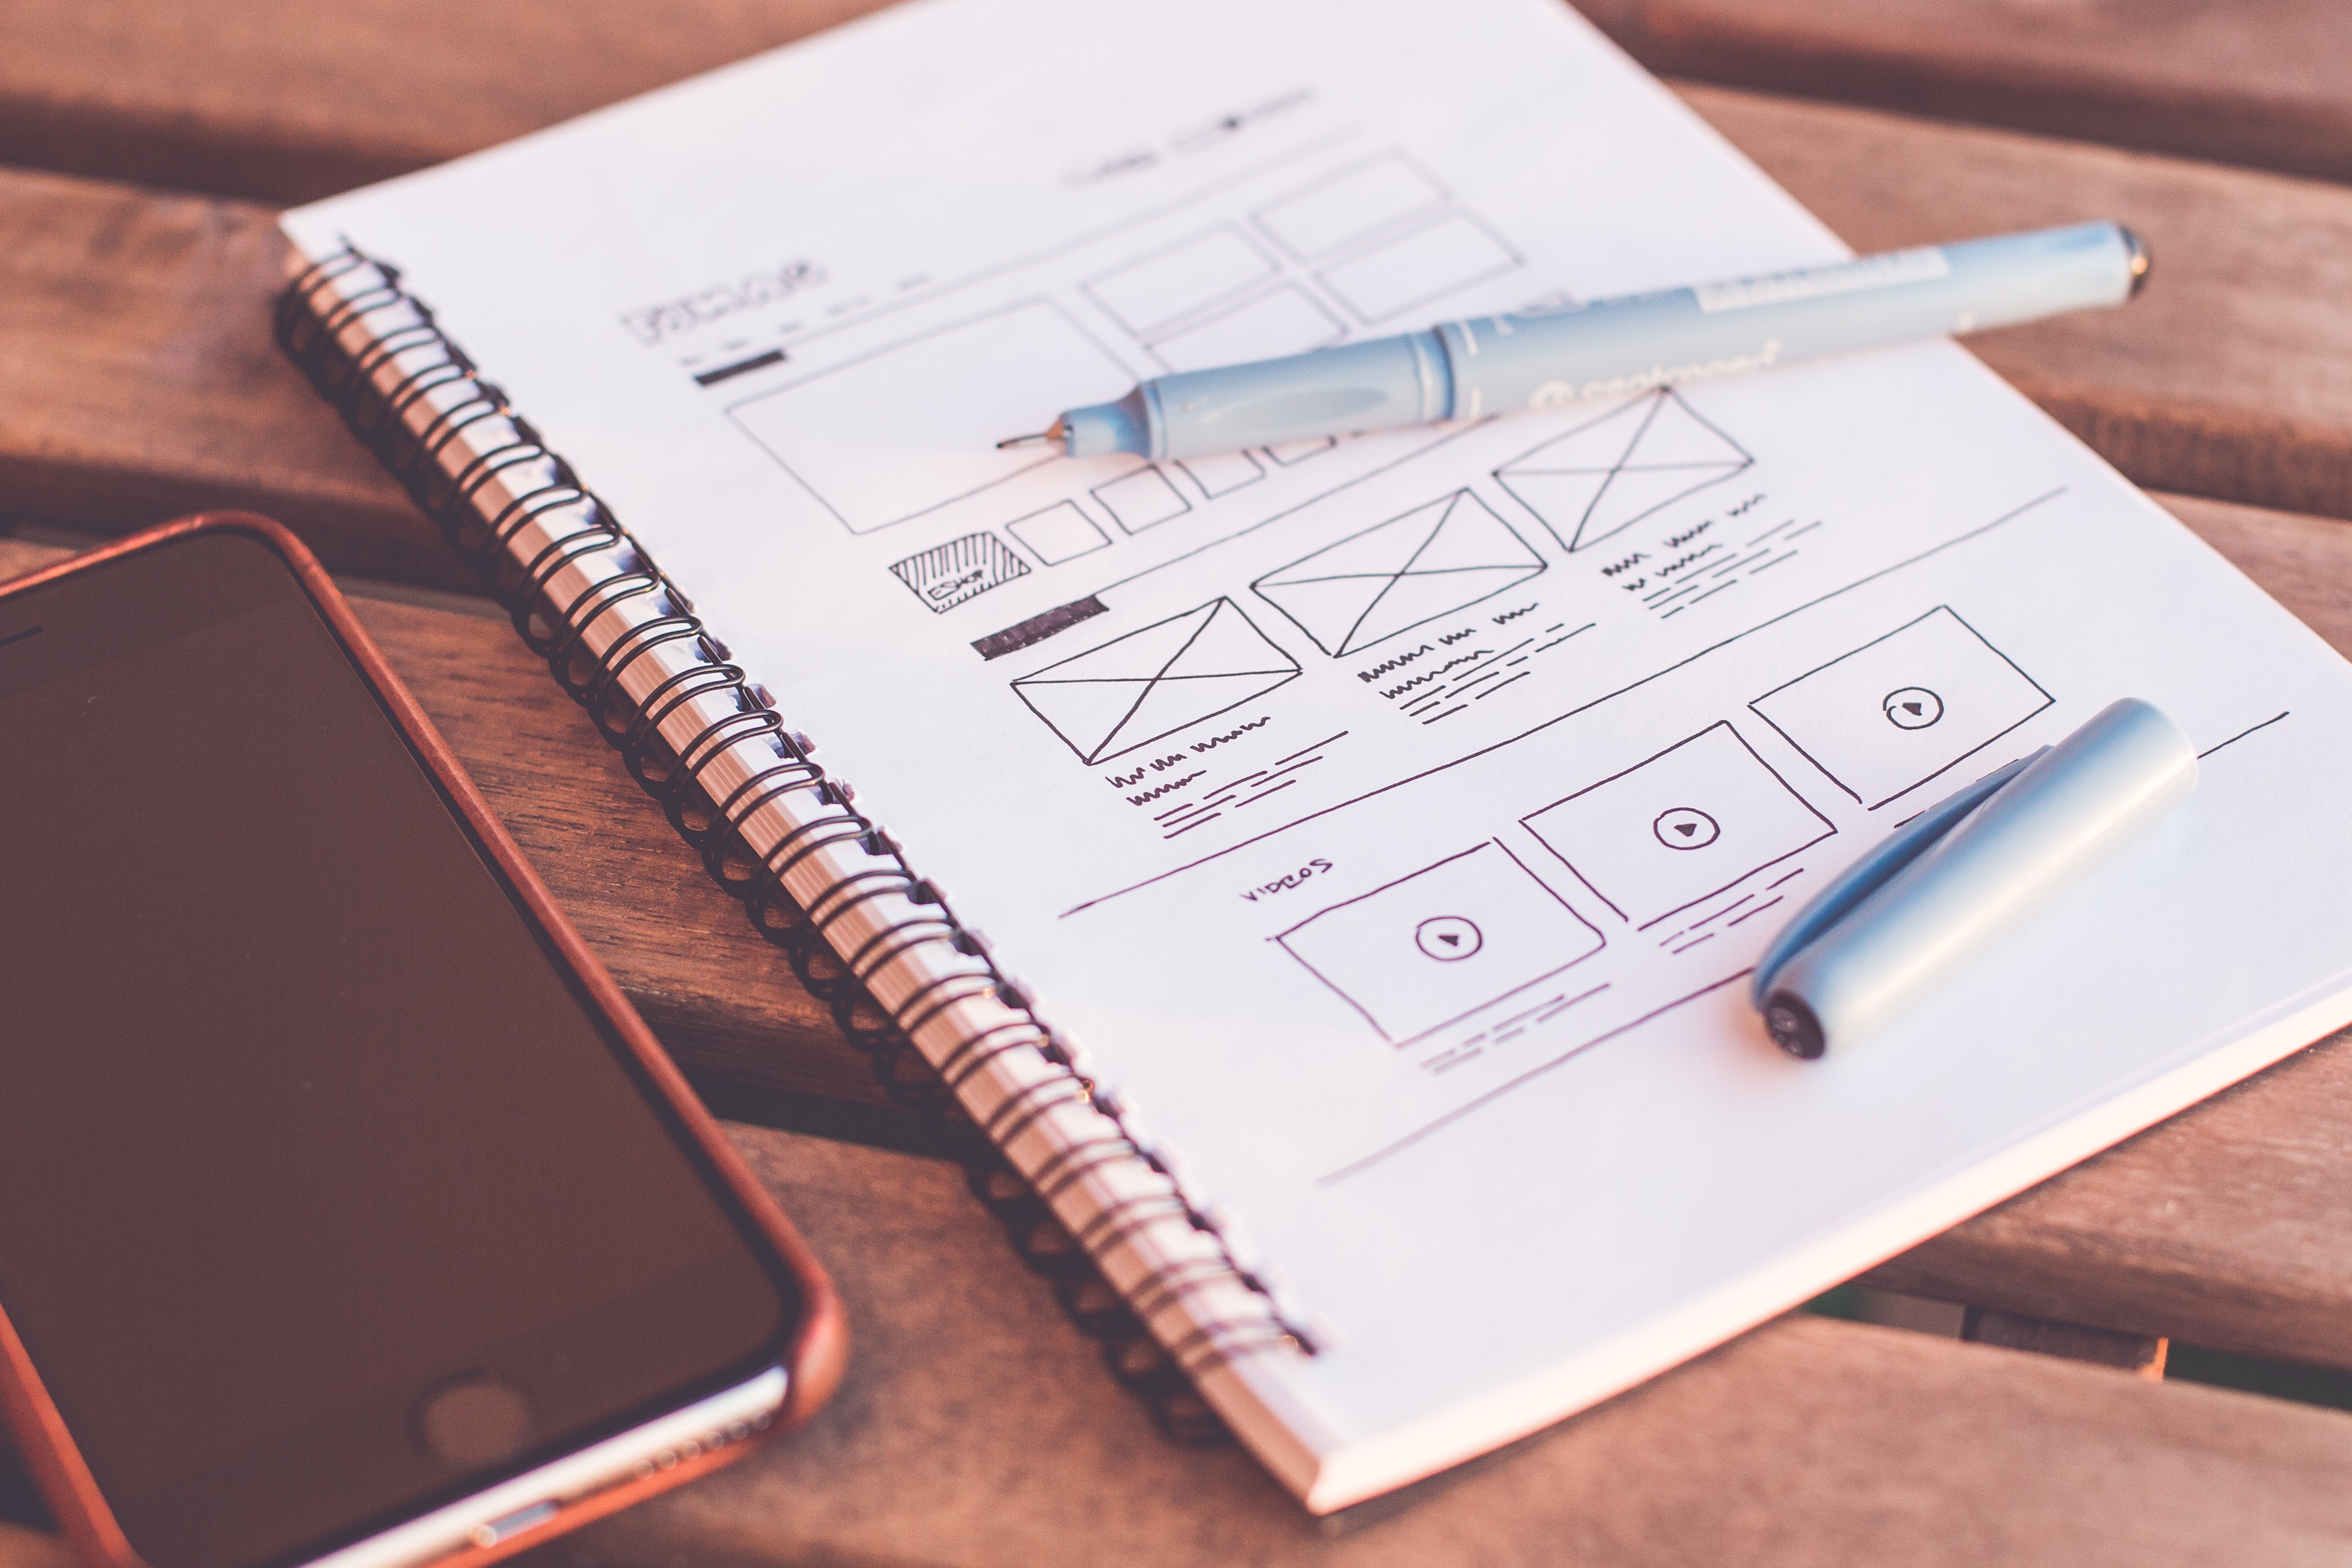 phone beside notebook showing wireframe designs